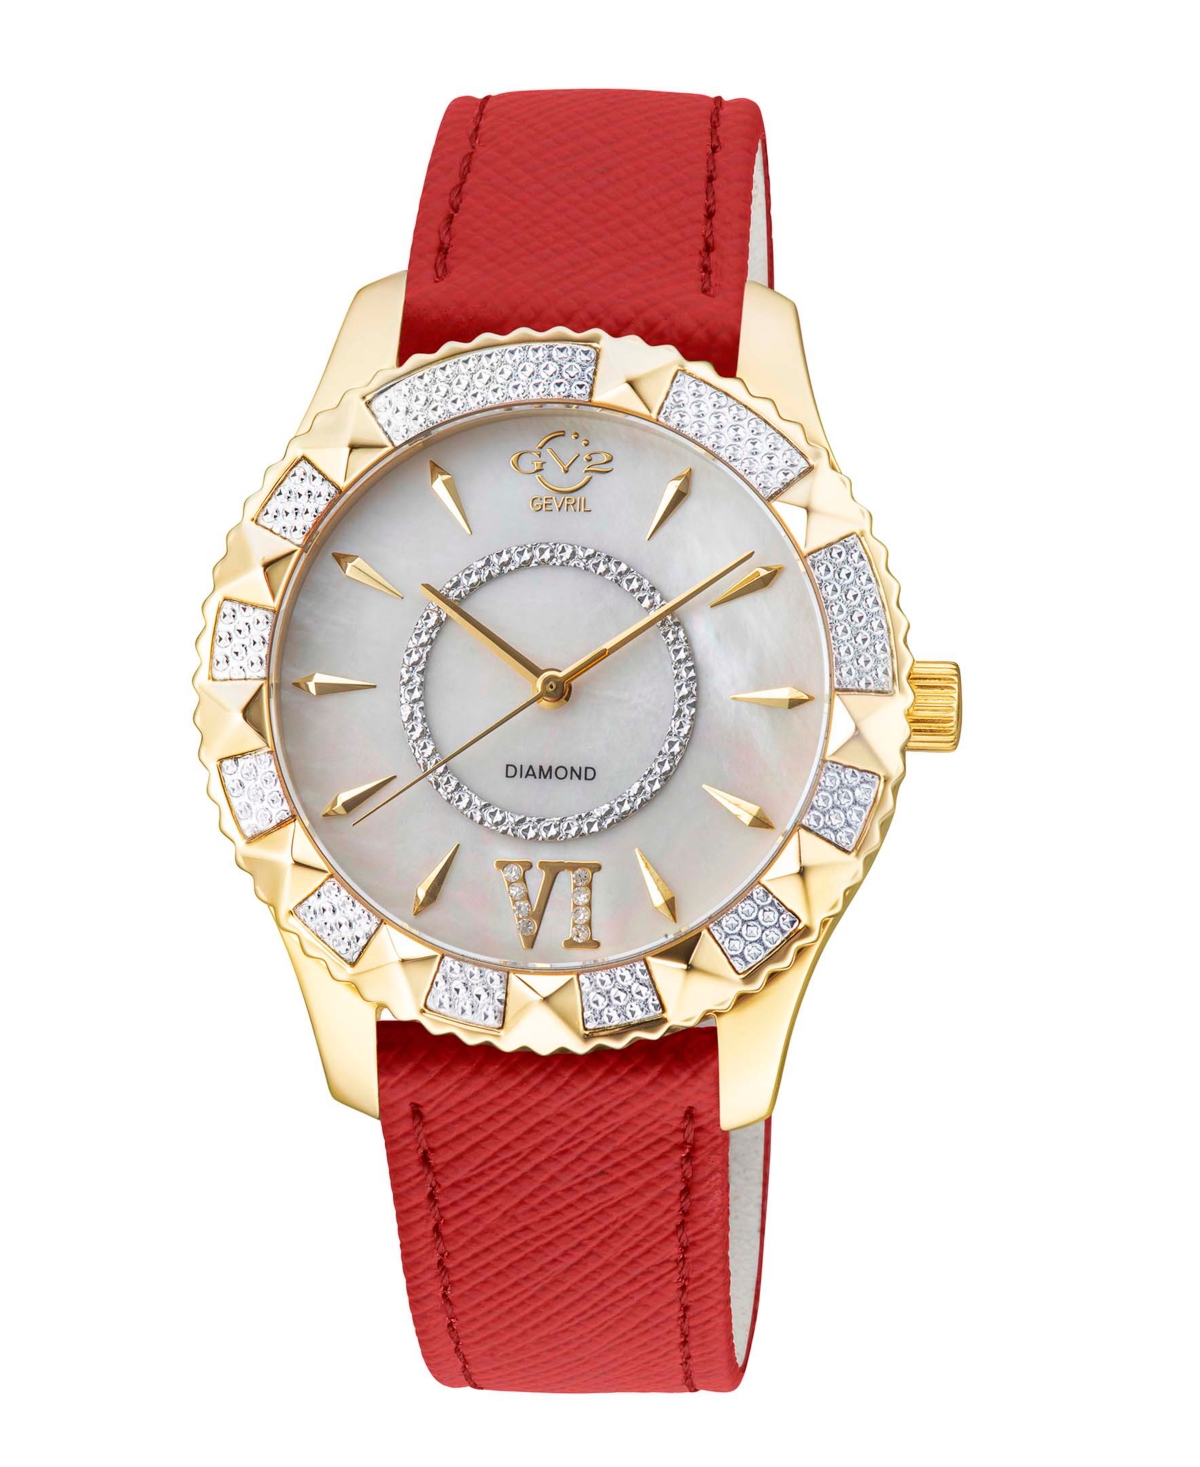 Gv2 By Gevril Women's Venice Swiss Quartz Red Faux Leather Watch 38mm